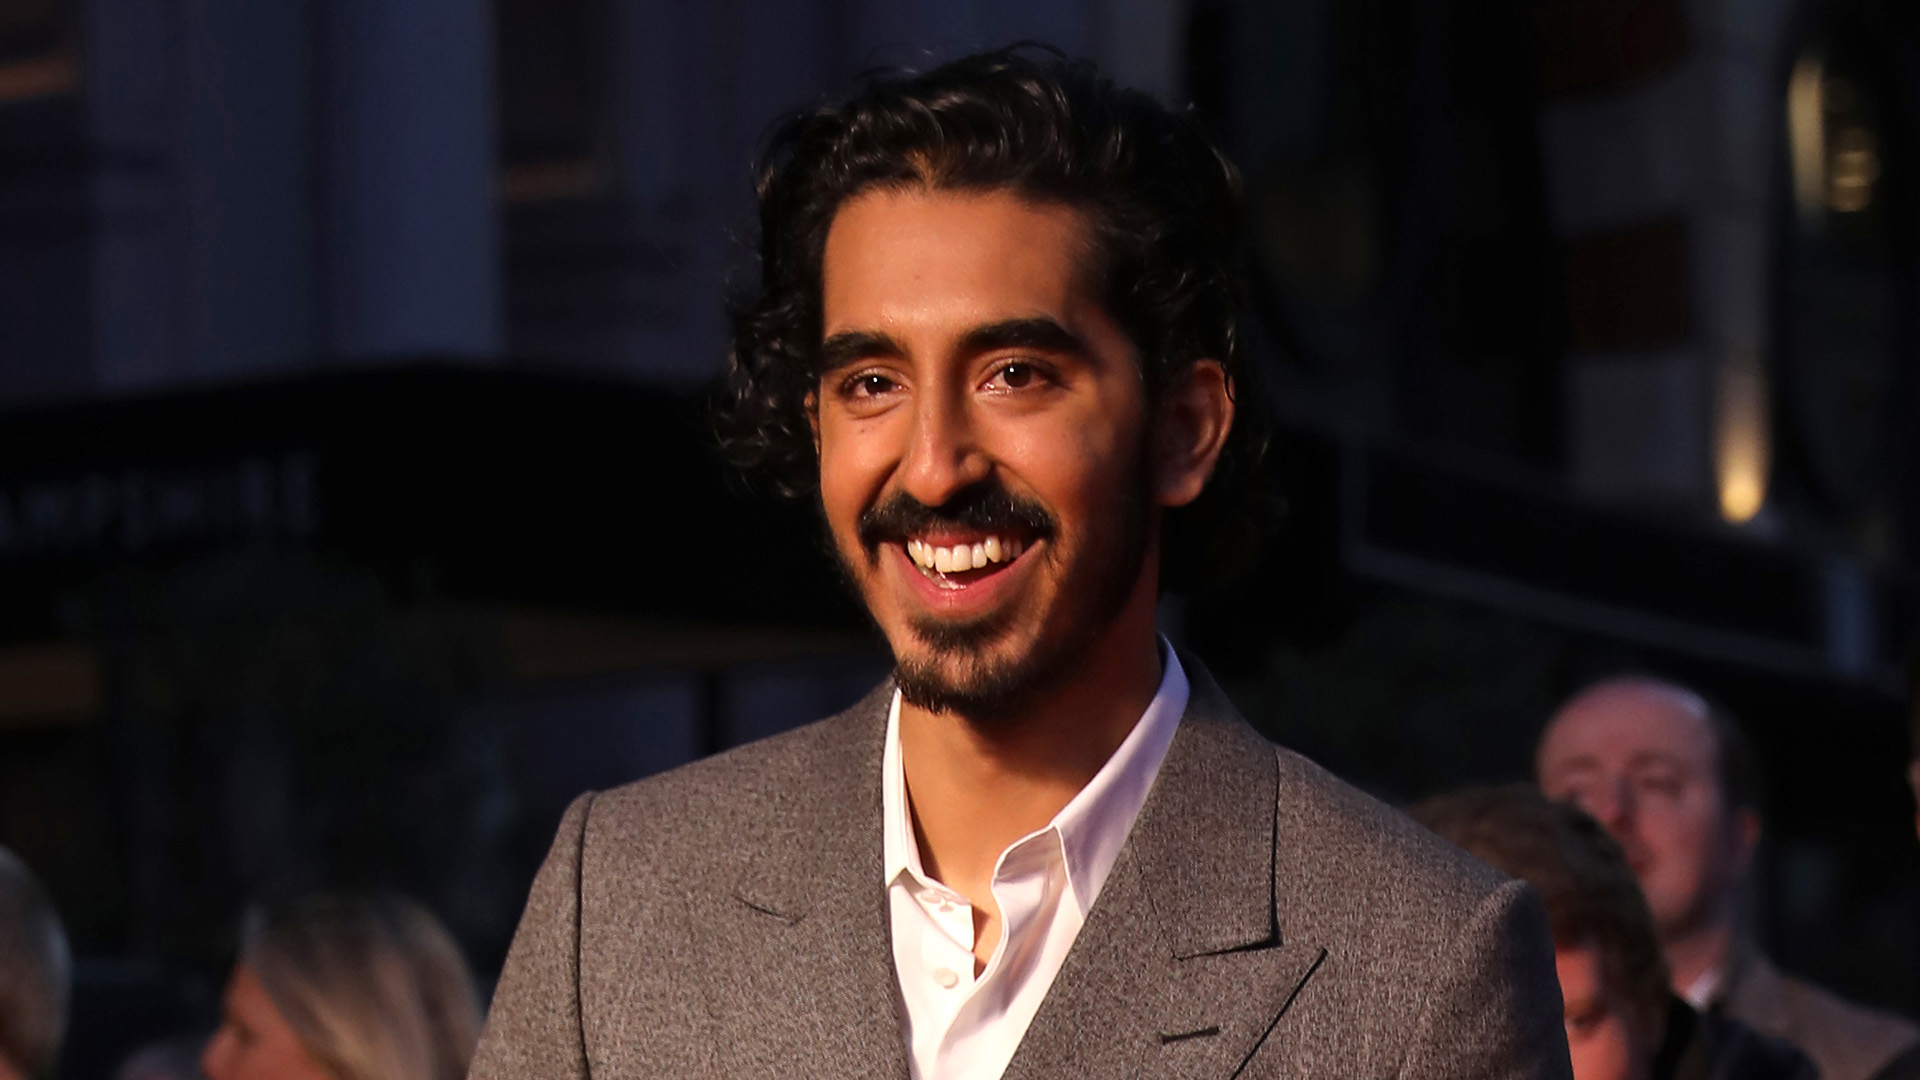 Where to Look for Dev Patel: From 'Skins' to 'The Green Knight'